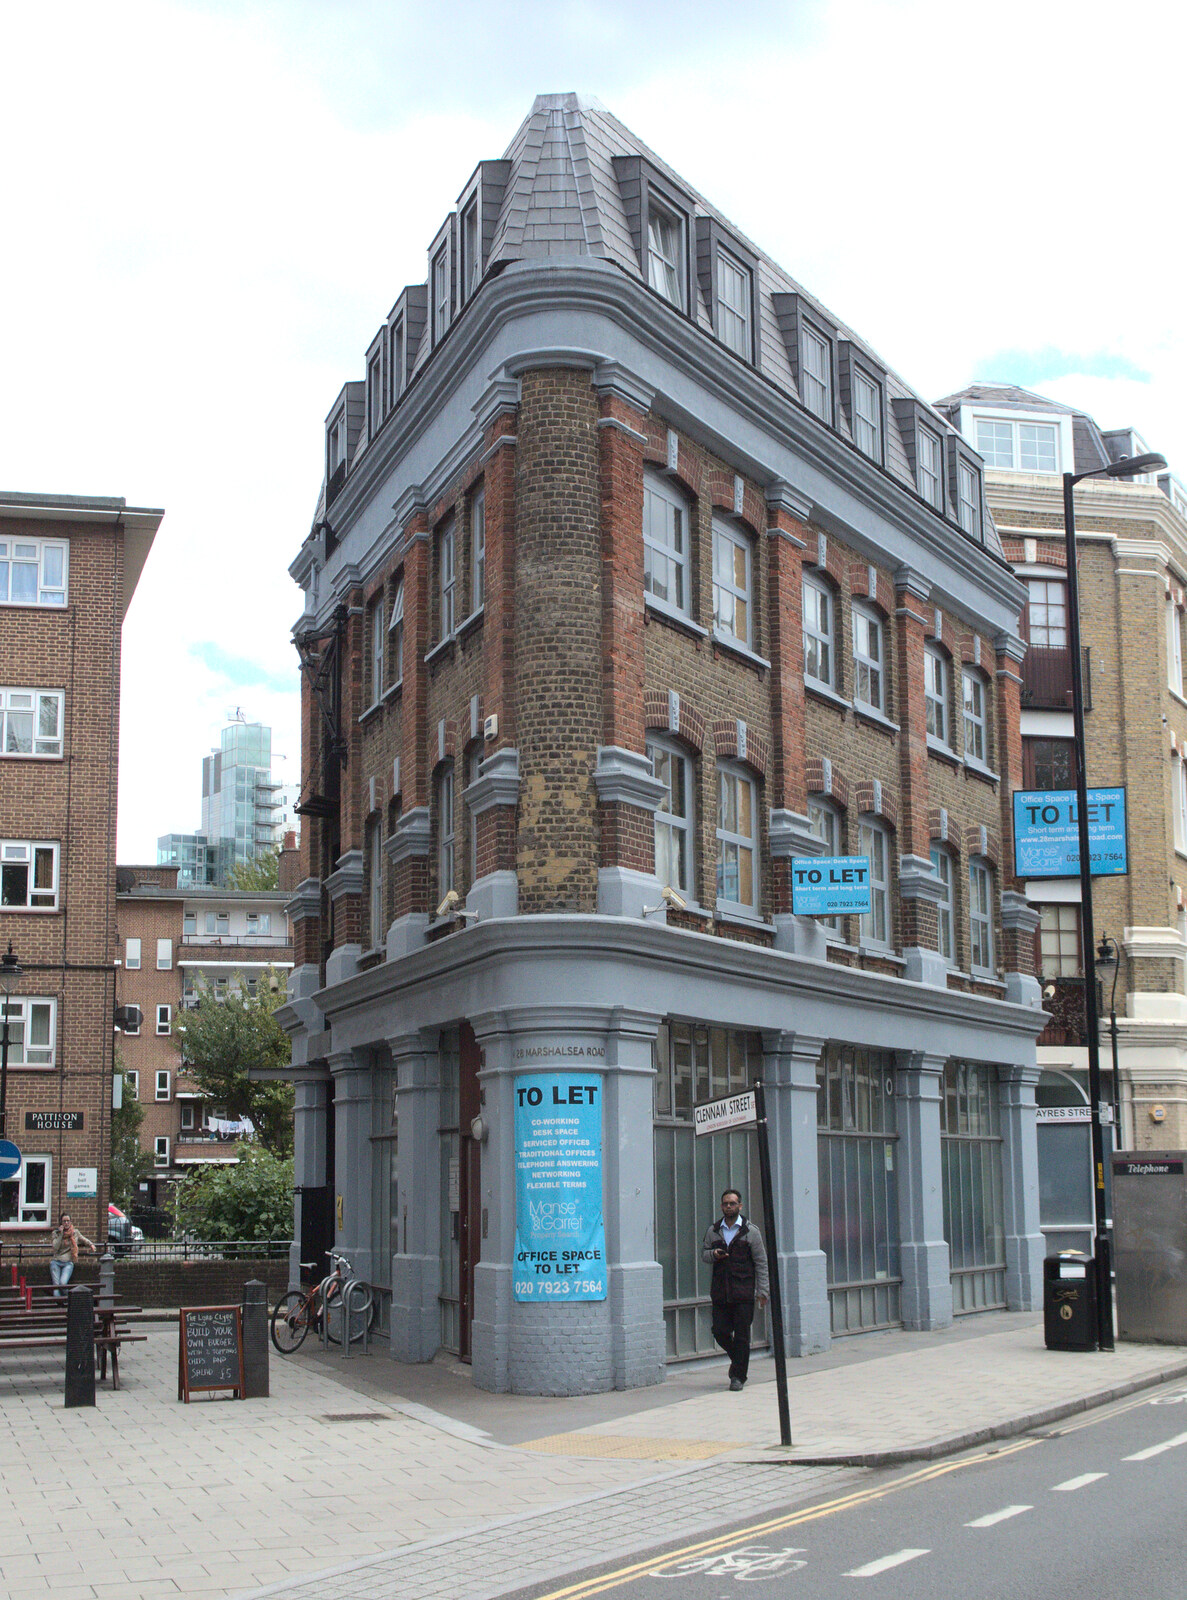 A mini Flatiron building on Marshalsea Avenue from SwiftKey Innovation Day, and Pizza Pub, Westminster and Southwark - 14th August 2014